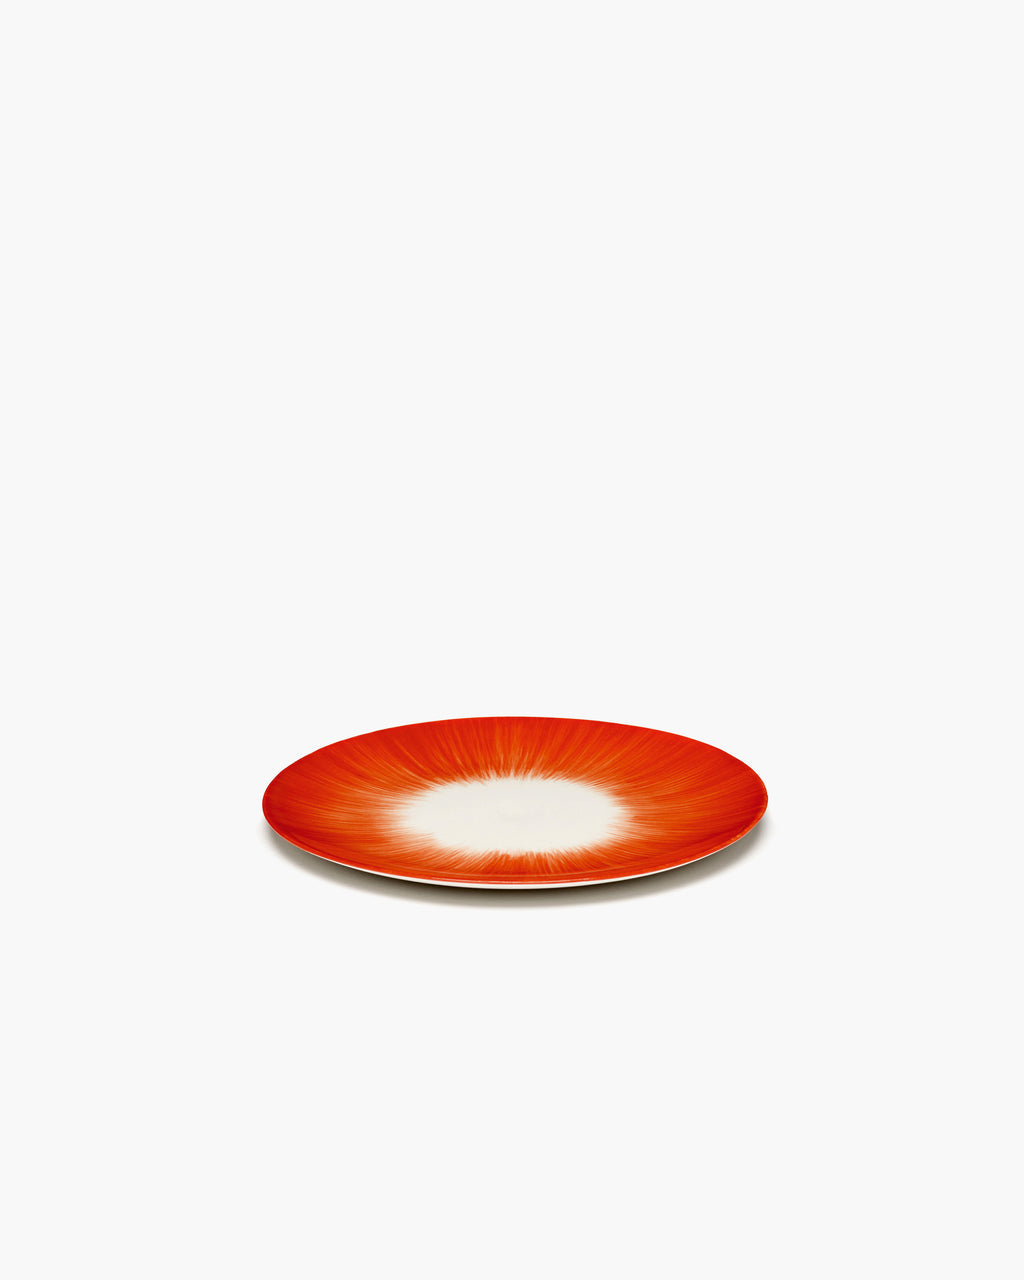 Breakfast Plate White/Red Variation 5 De Collection